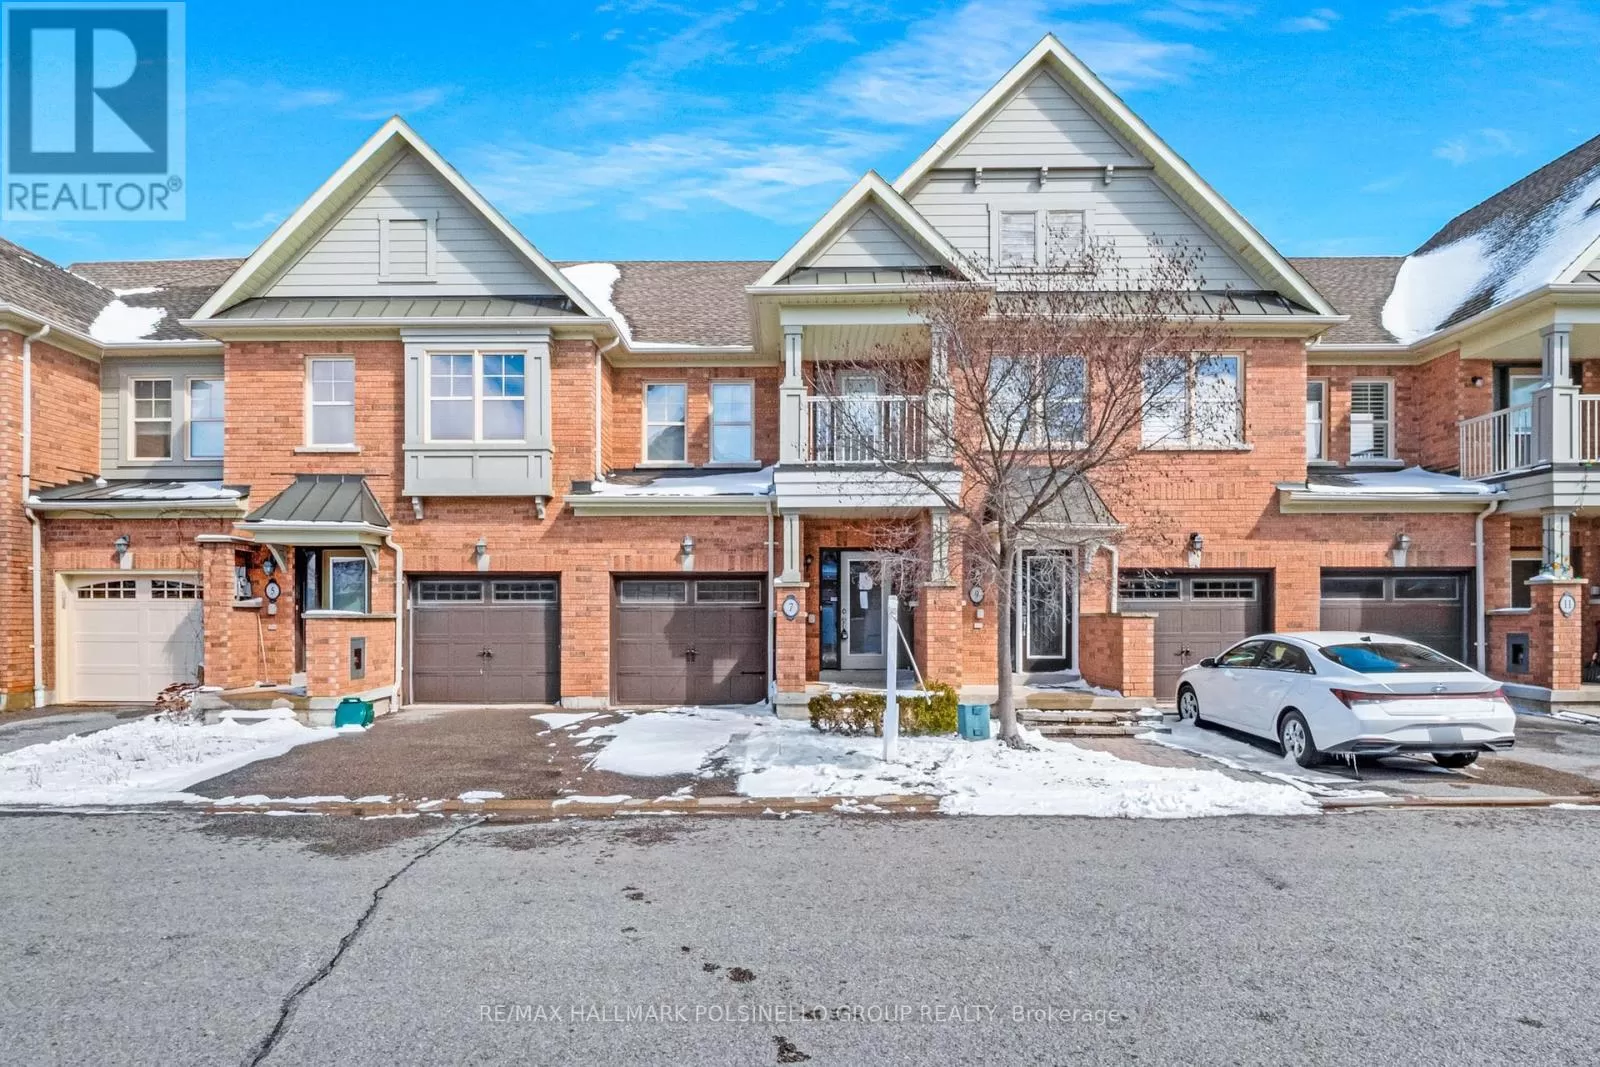 Row / Townhouse for rent: 7 Latitude Lane, Whitchurch-Stouffville, Ontario L4A 0T1